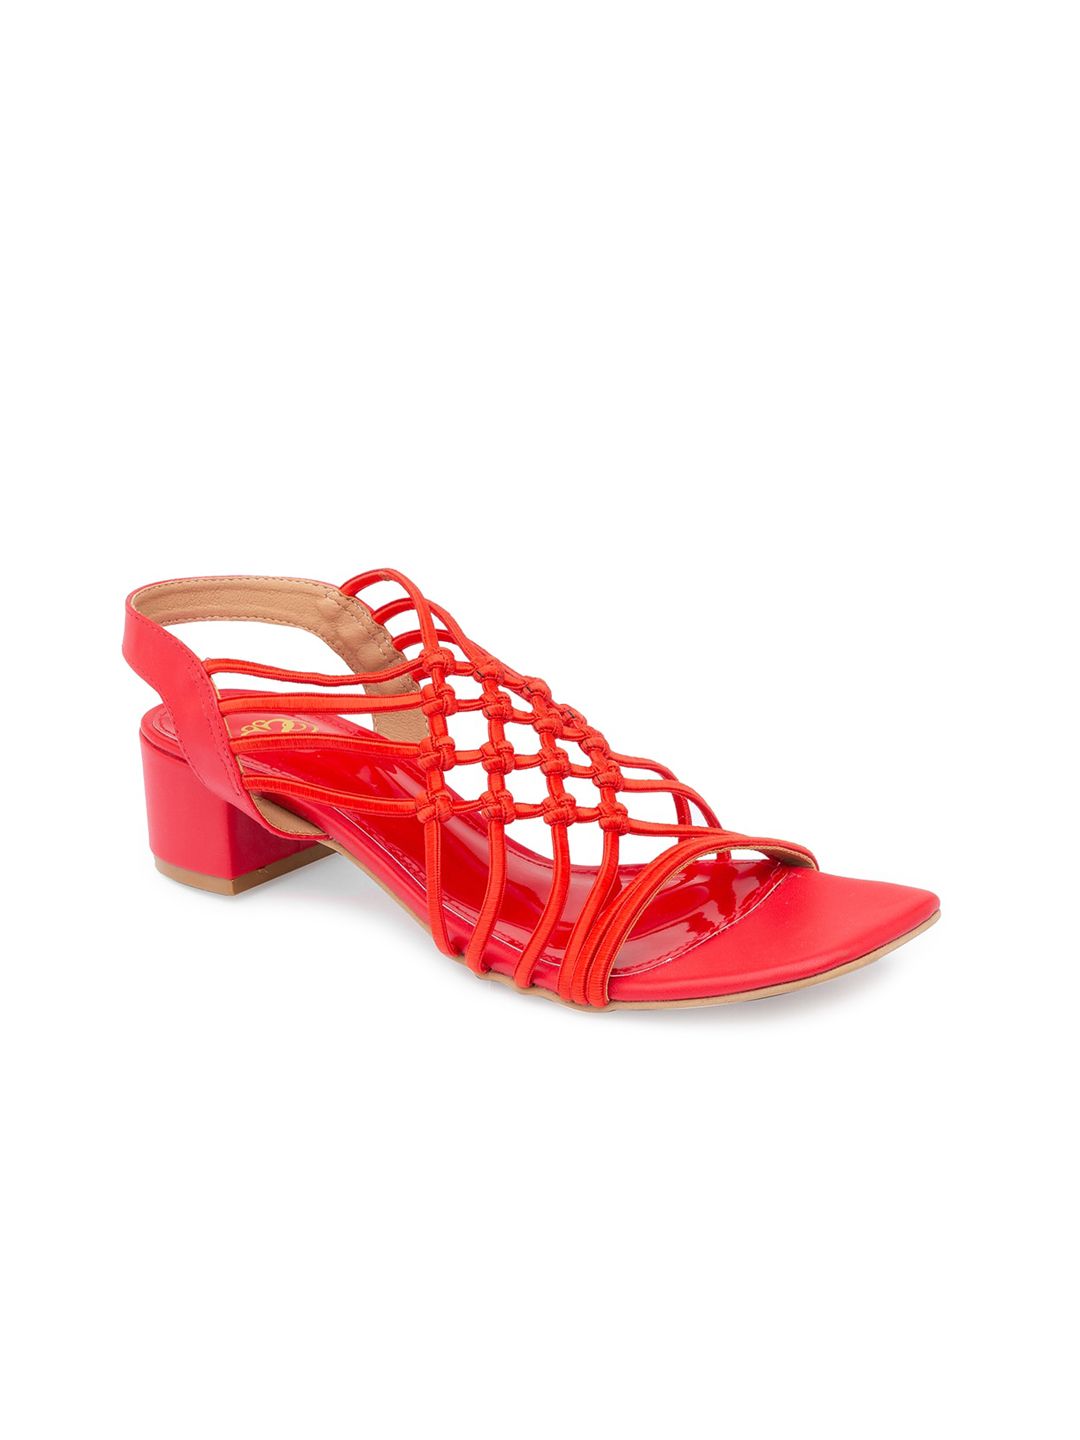 Sole To Soul Red Block Sandals with Tassels Price in India